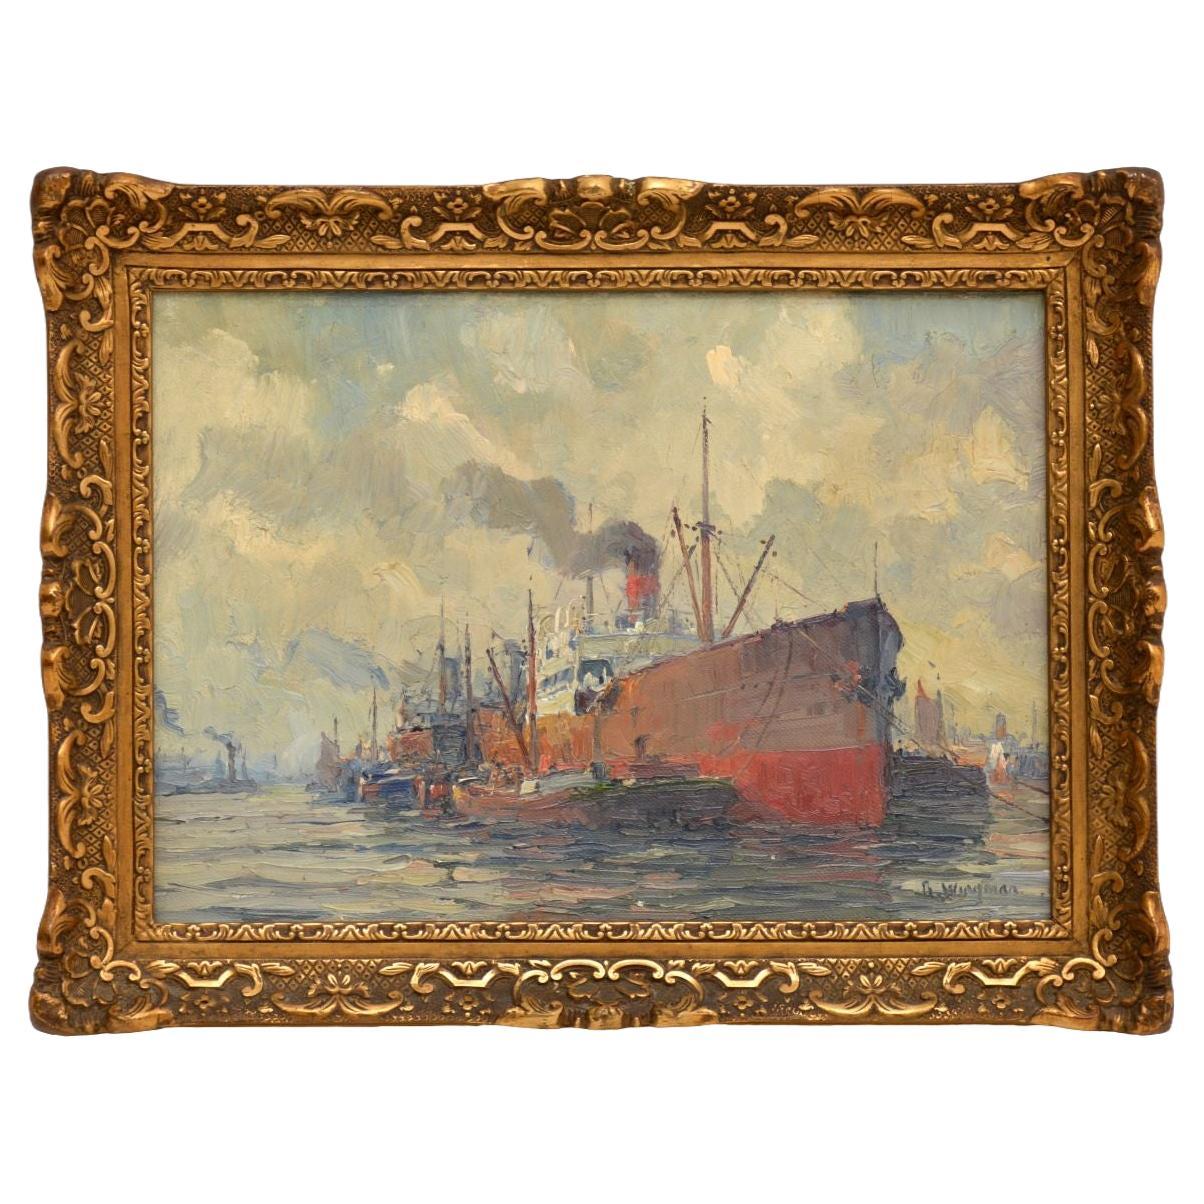 Antique Oil Painting on Canvass by Gerard Wiegman (1875-1964)